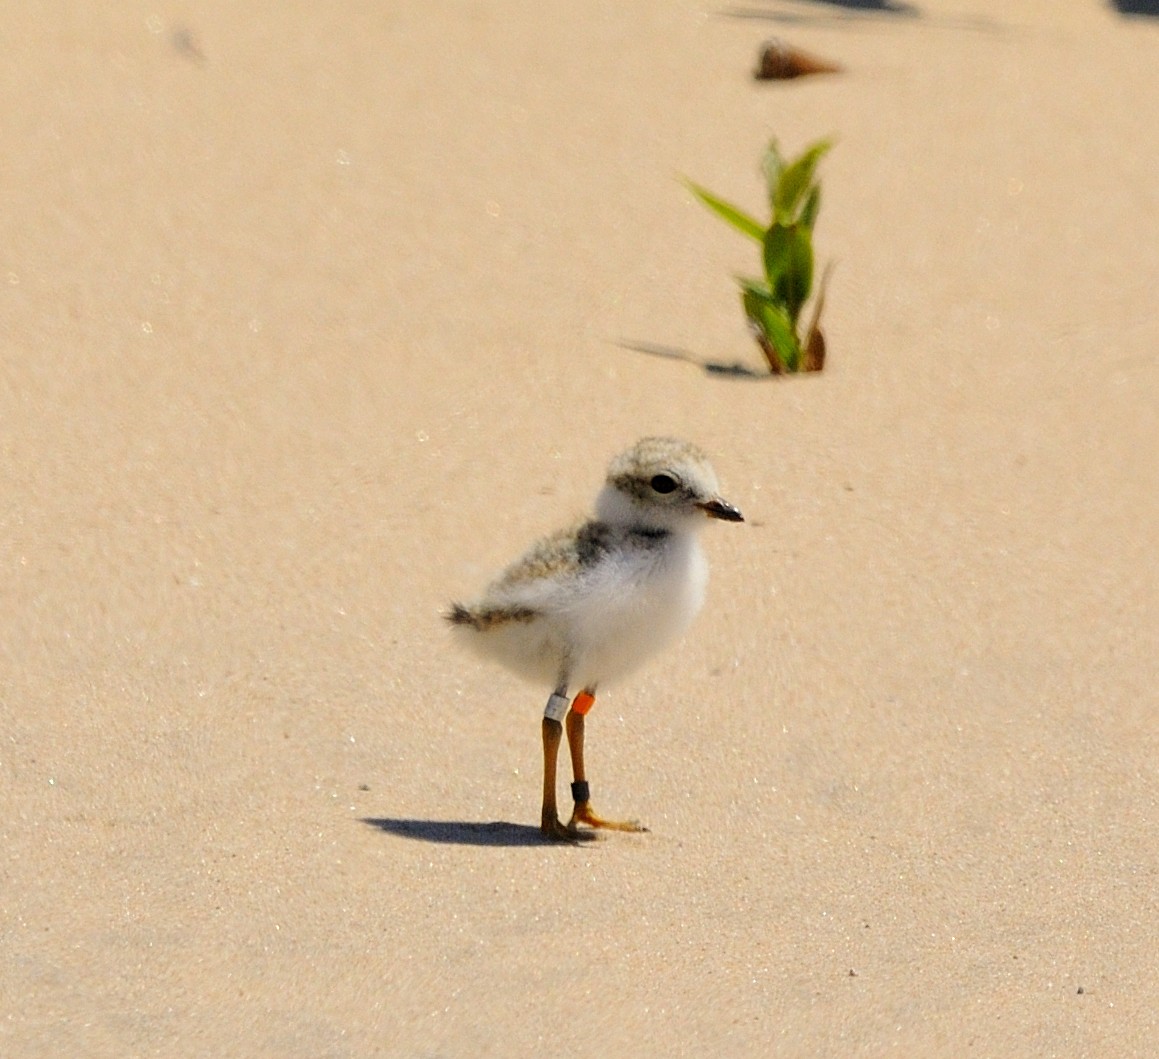 Piping Plover - Mary Magistro